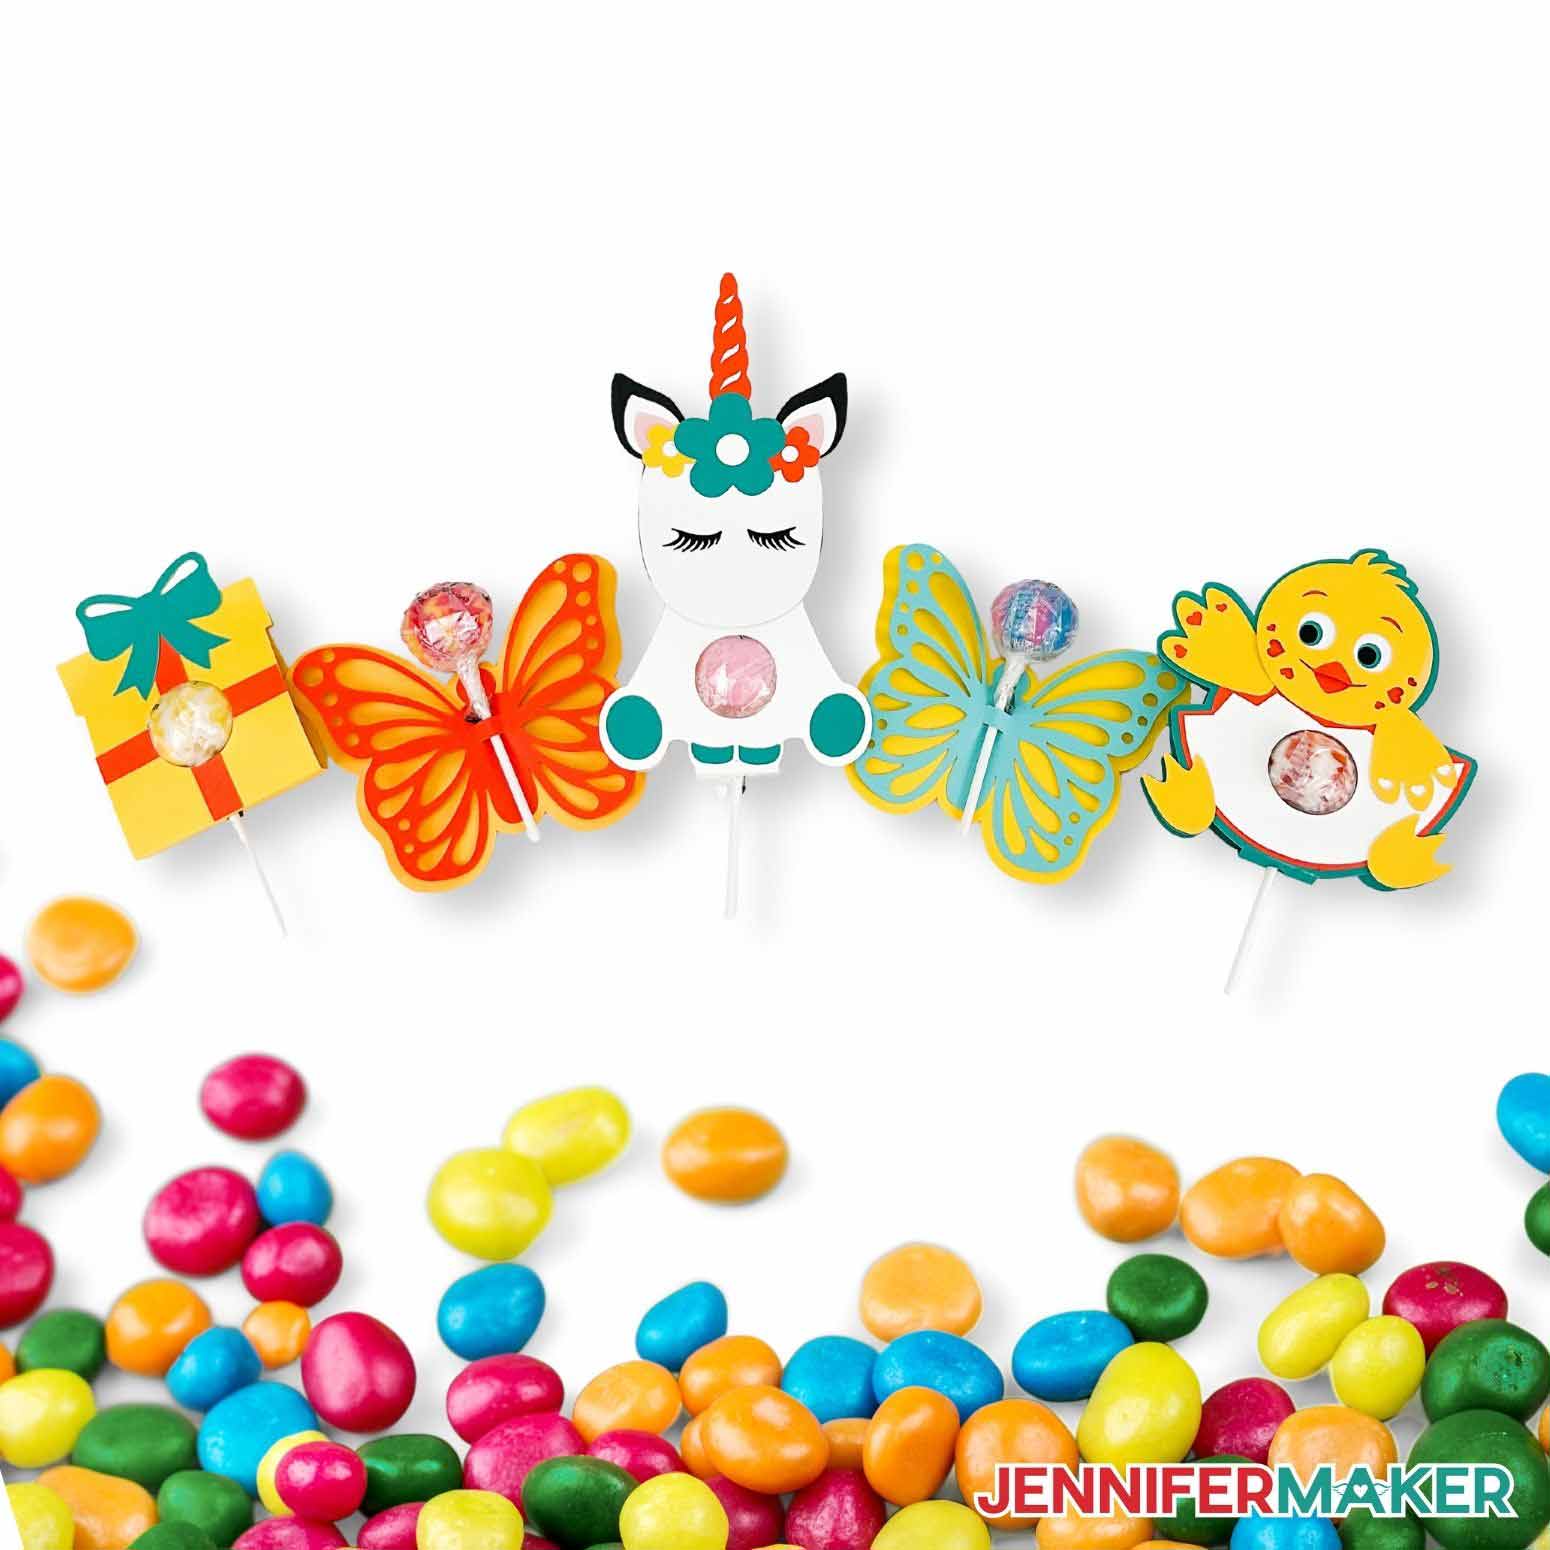 Present, unicorn, chick, and butterfly cardstock DIY lollipop holders on a white background surrounded by candy.